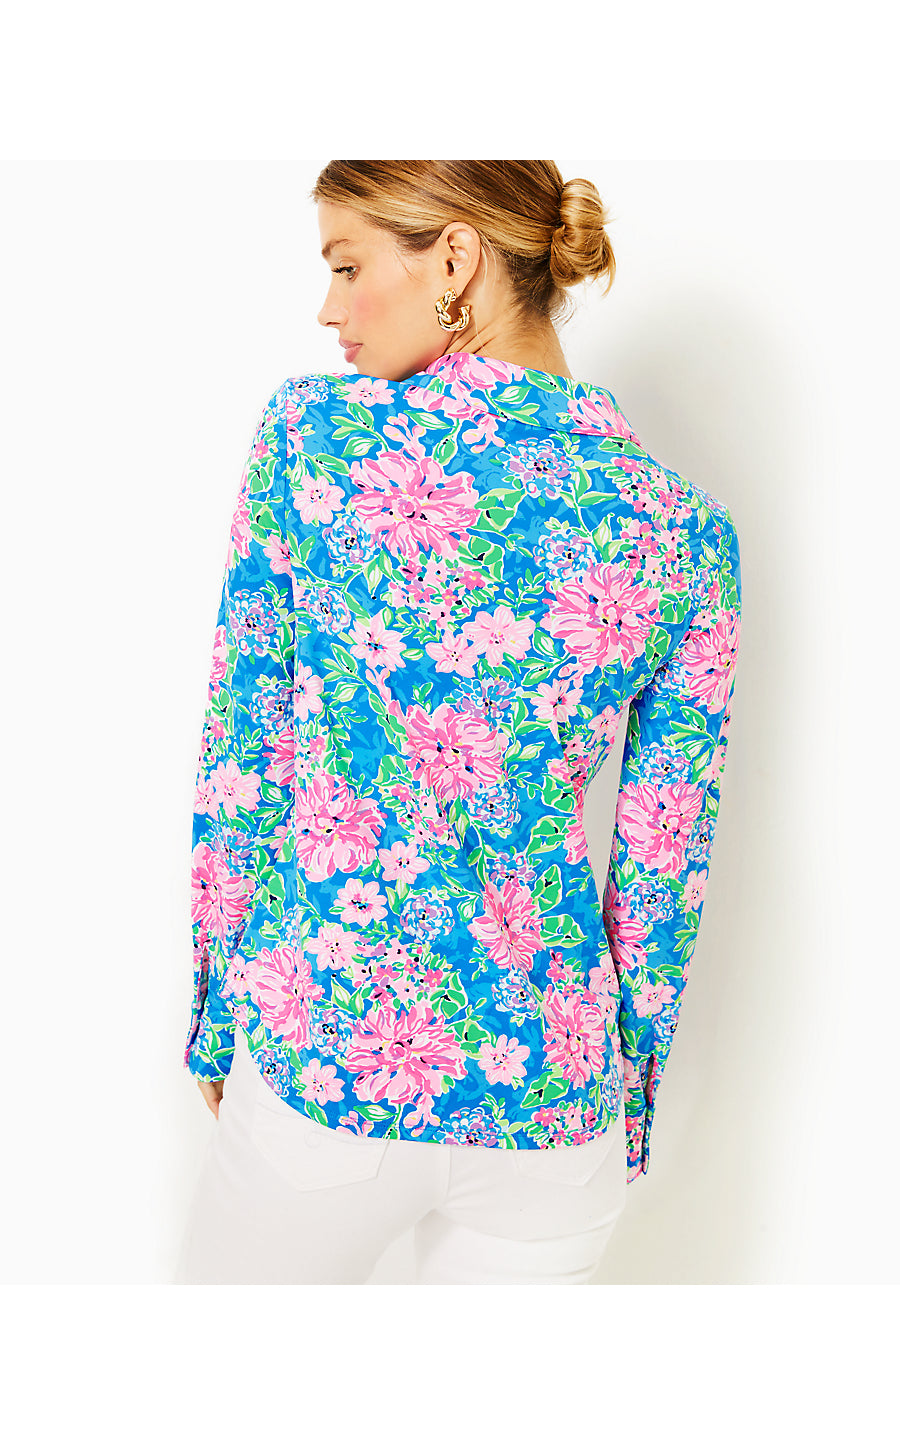 MARLENA BUTTON DOWN - SPRING IN YOUR STEP